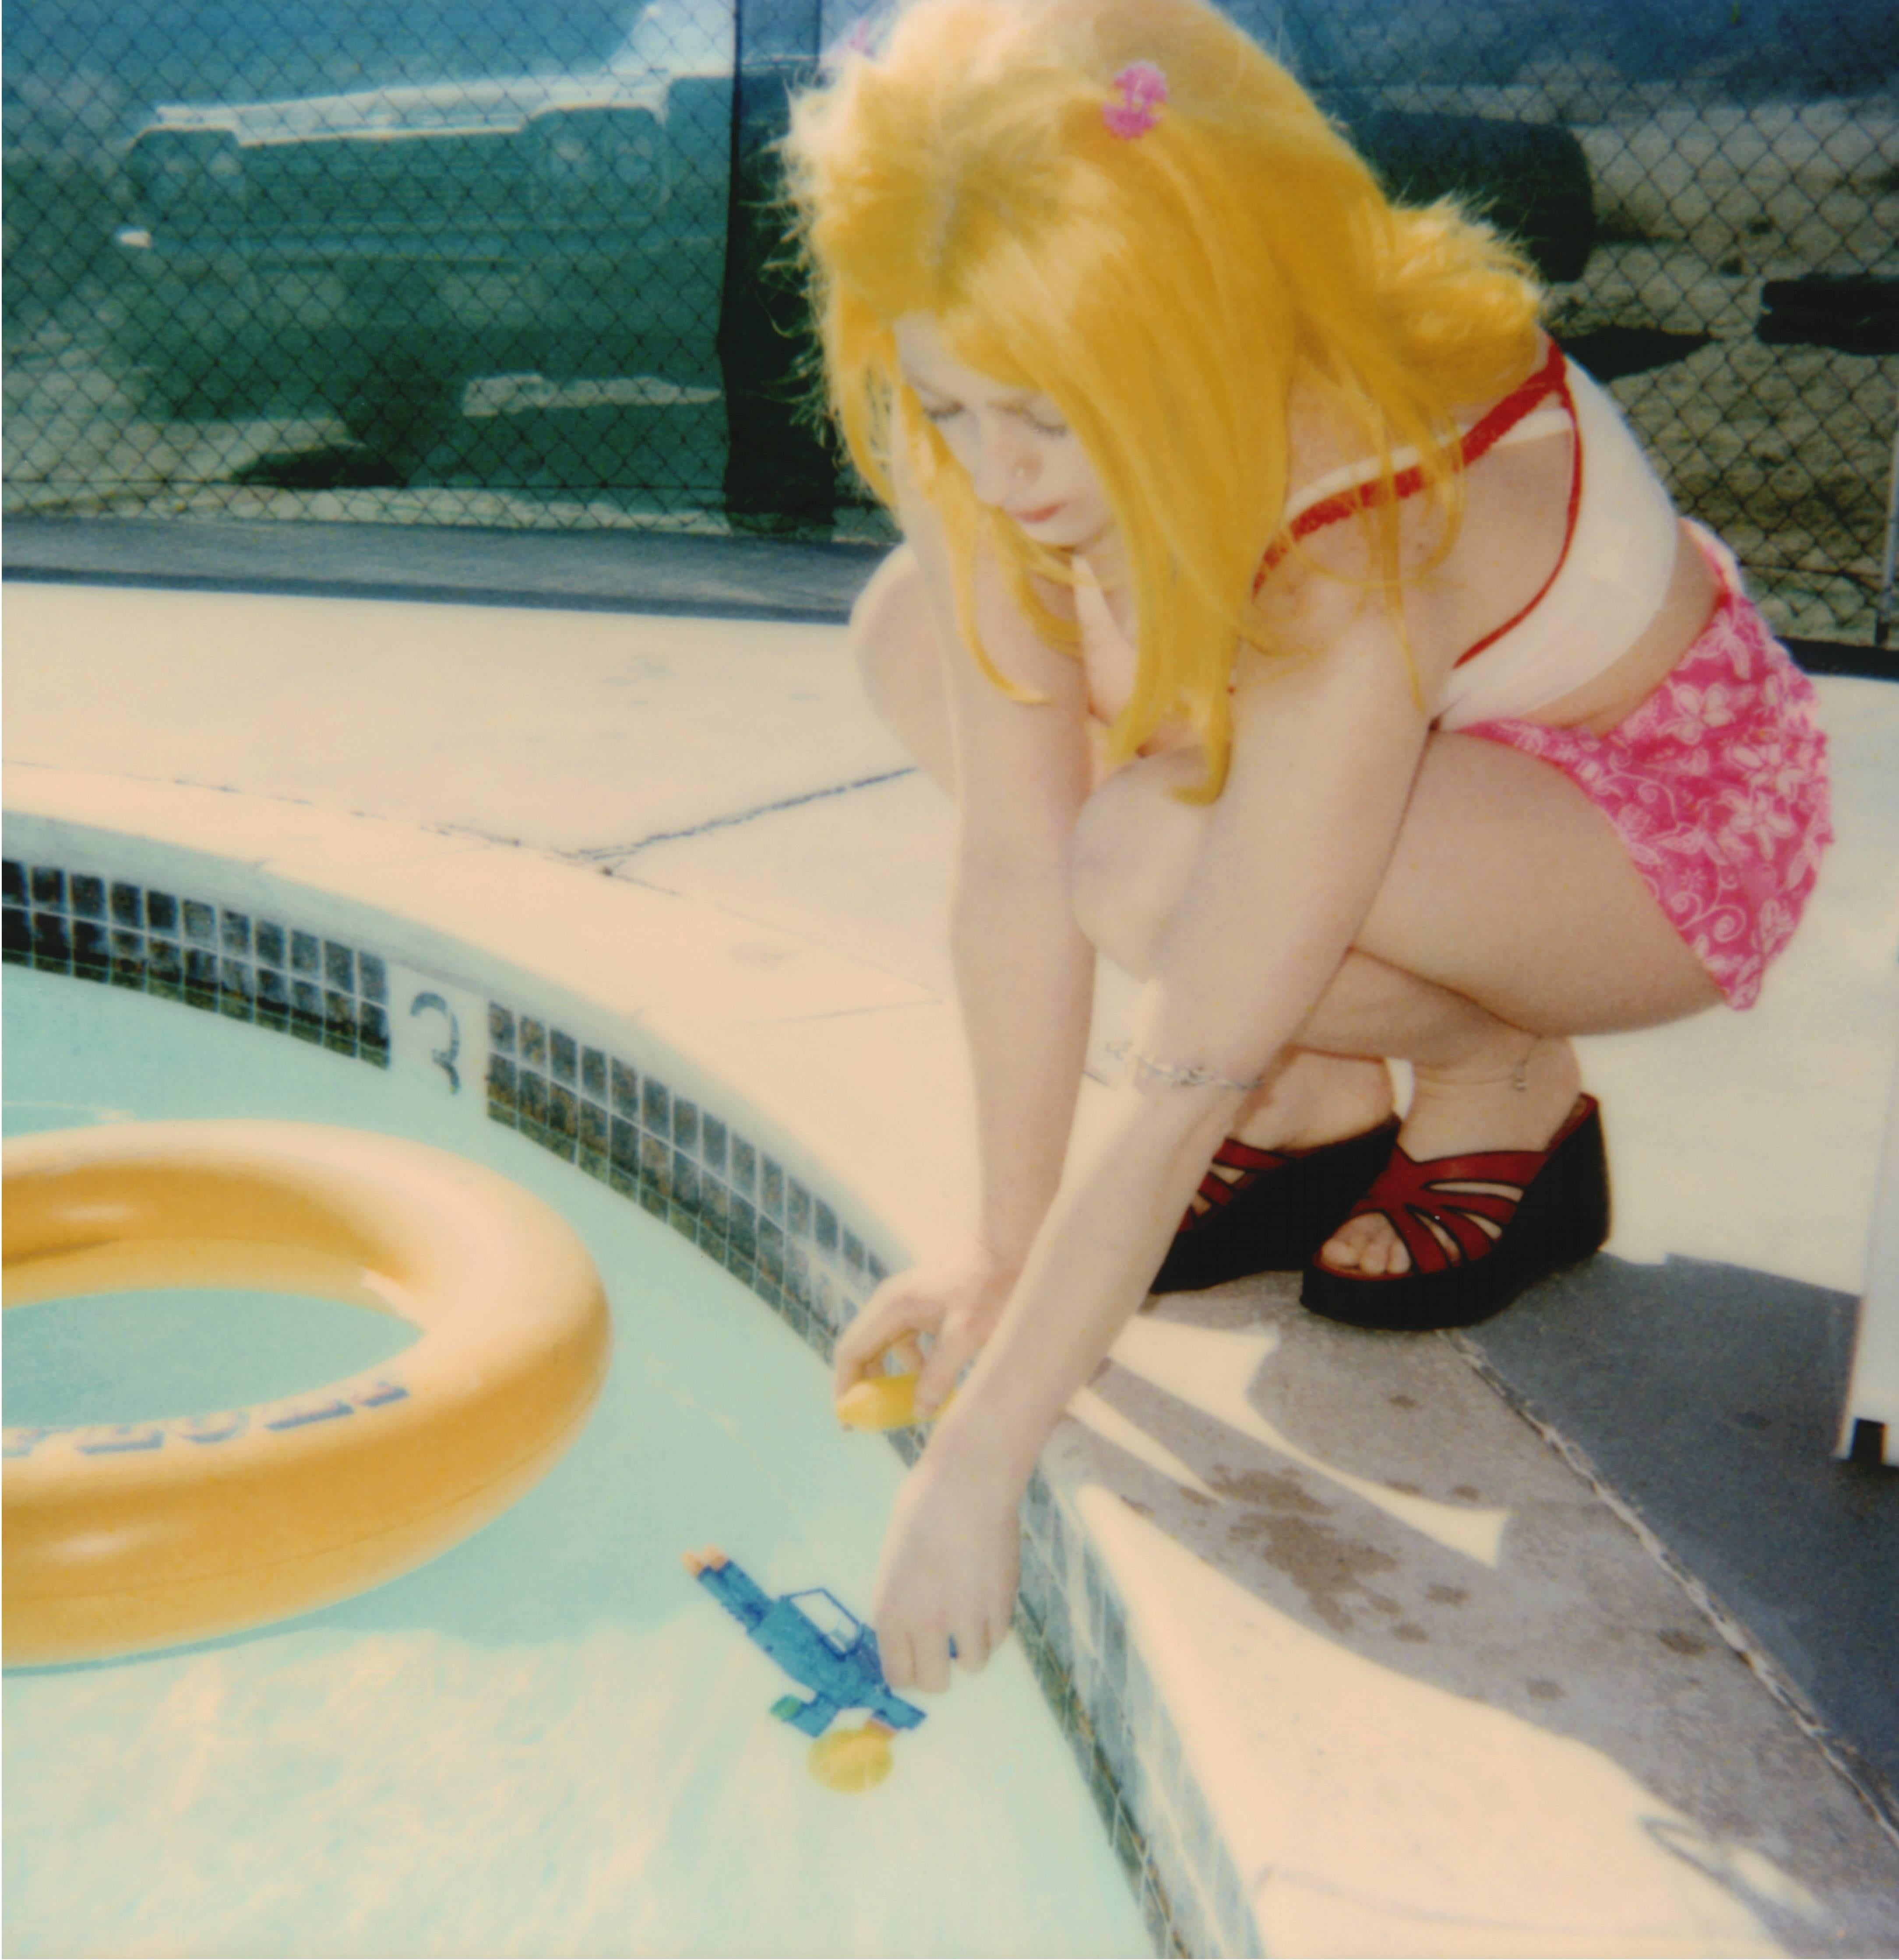 Stefanie Schneider Portrait Photograph - Max by the Pool (29 Palms, CA) analog, mounted